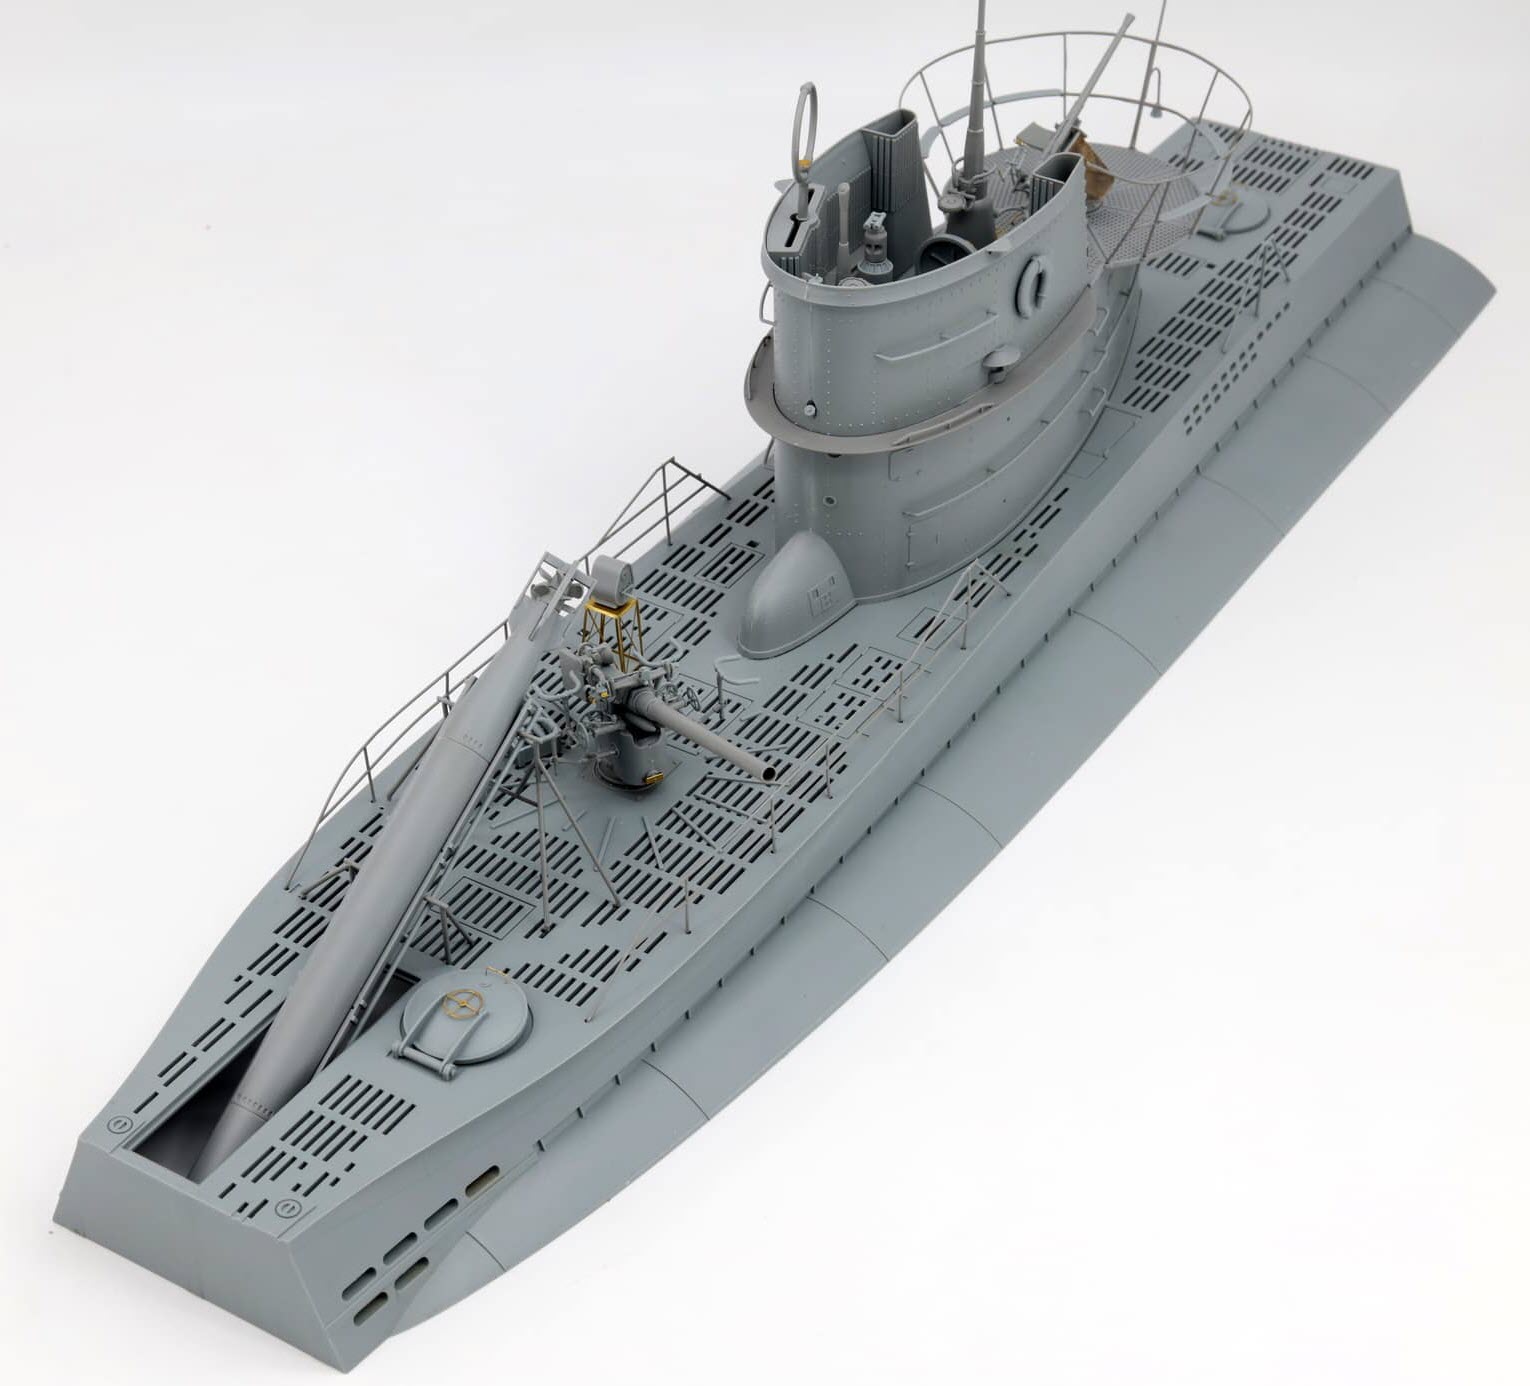 The Modelling News: Preview: Border Model's new 1/35th scale DKM